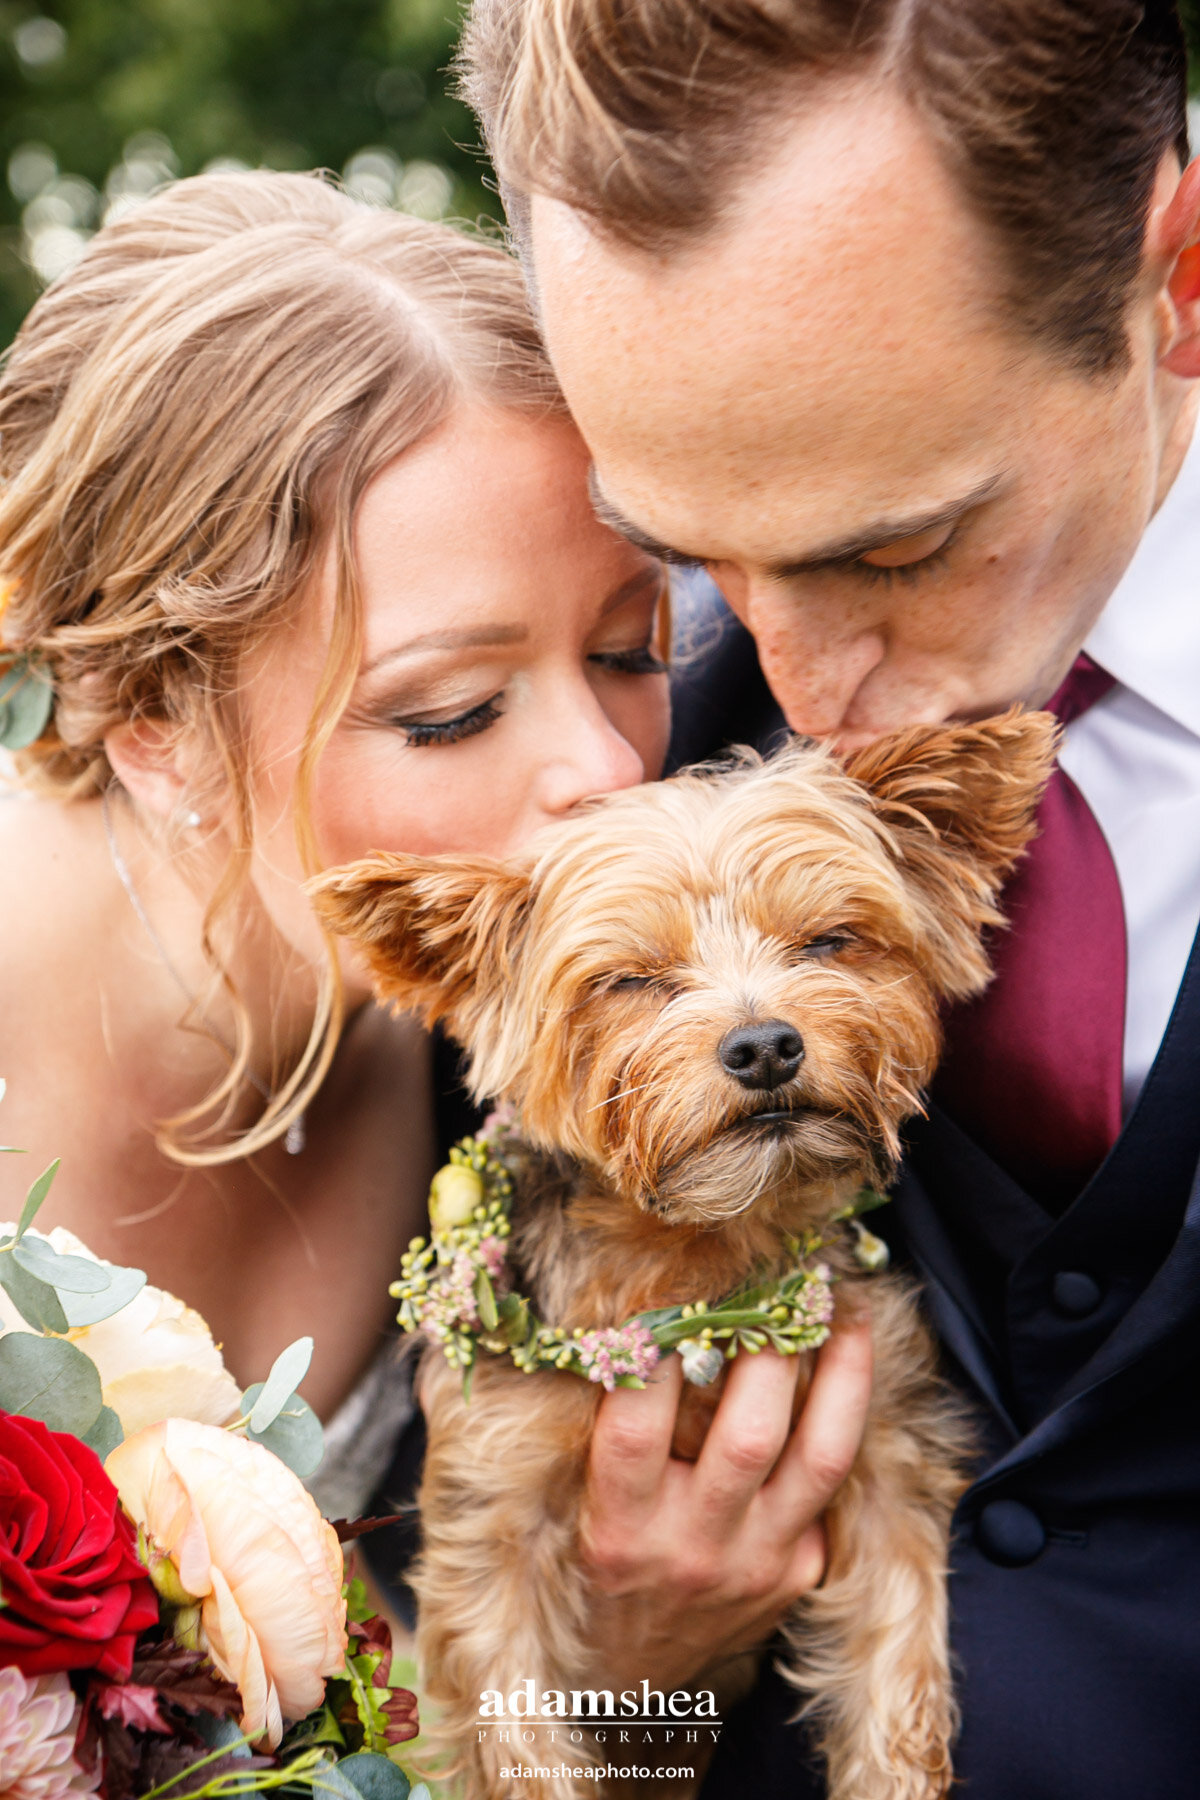 Gorgeous Wedding Fields at the Reserve - Stoughton WI - Adam Shea Photography - Bride and Bridesmaids - Bride and Groom with Dog